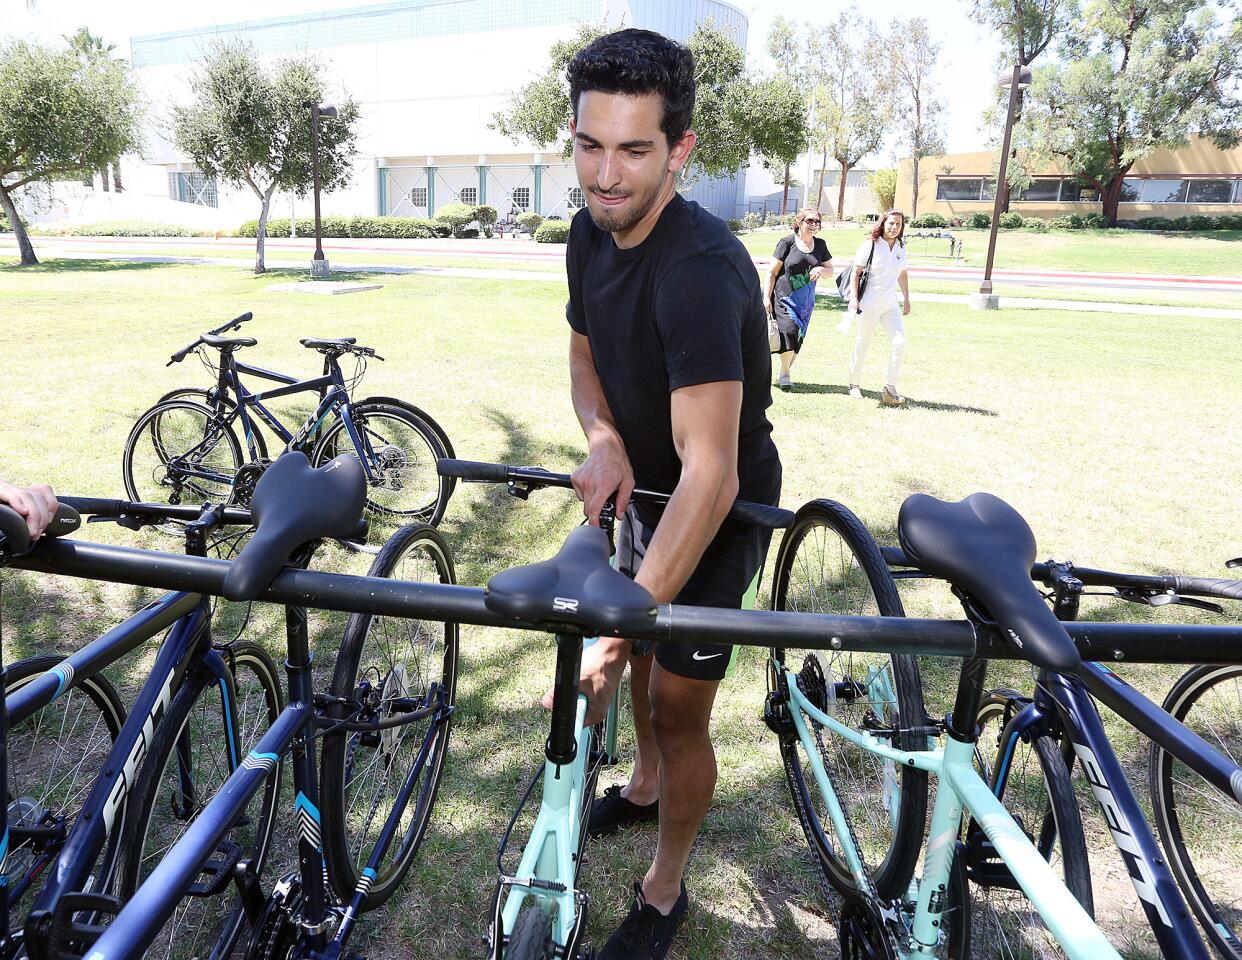 Photo Gallery: Foster youth gifted bicycles thanks to brothers’ charitable efforts